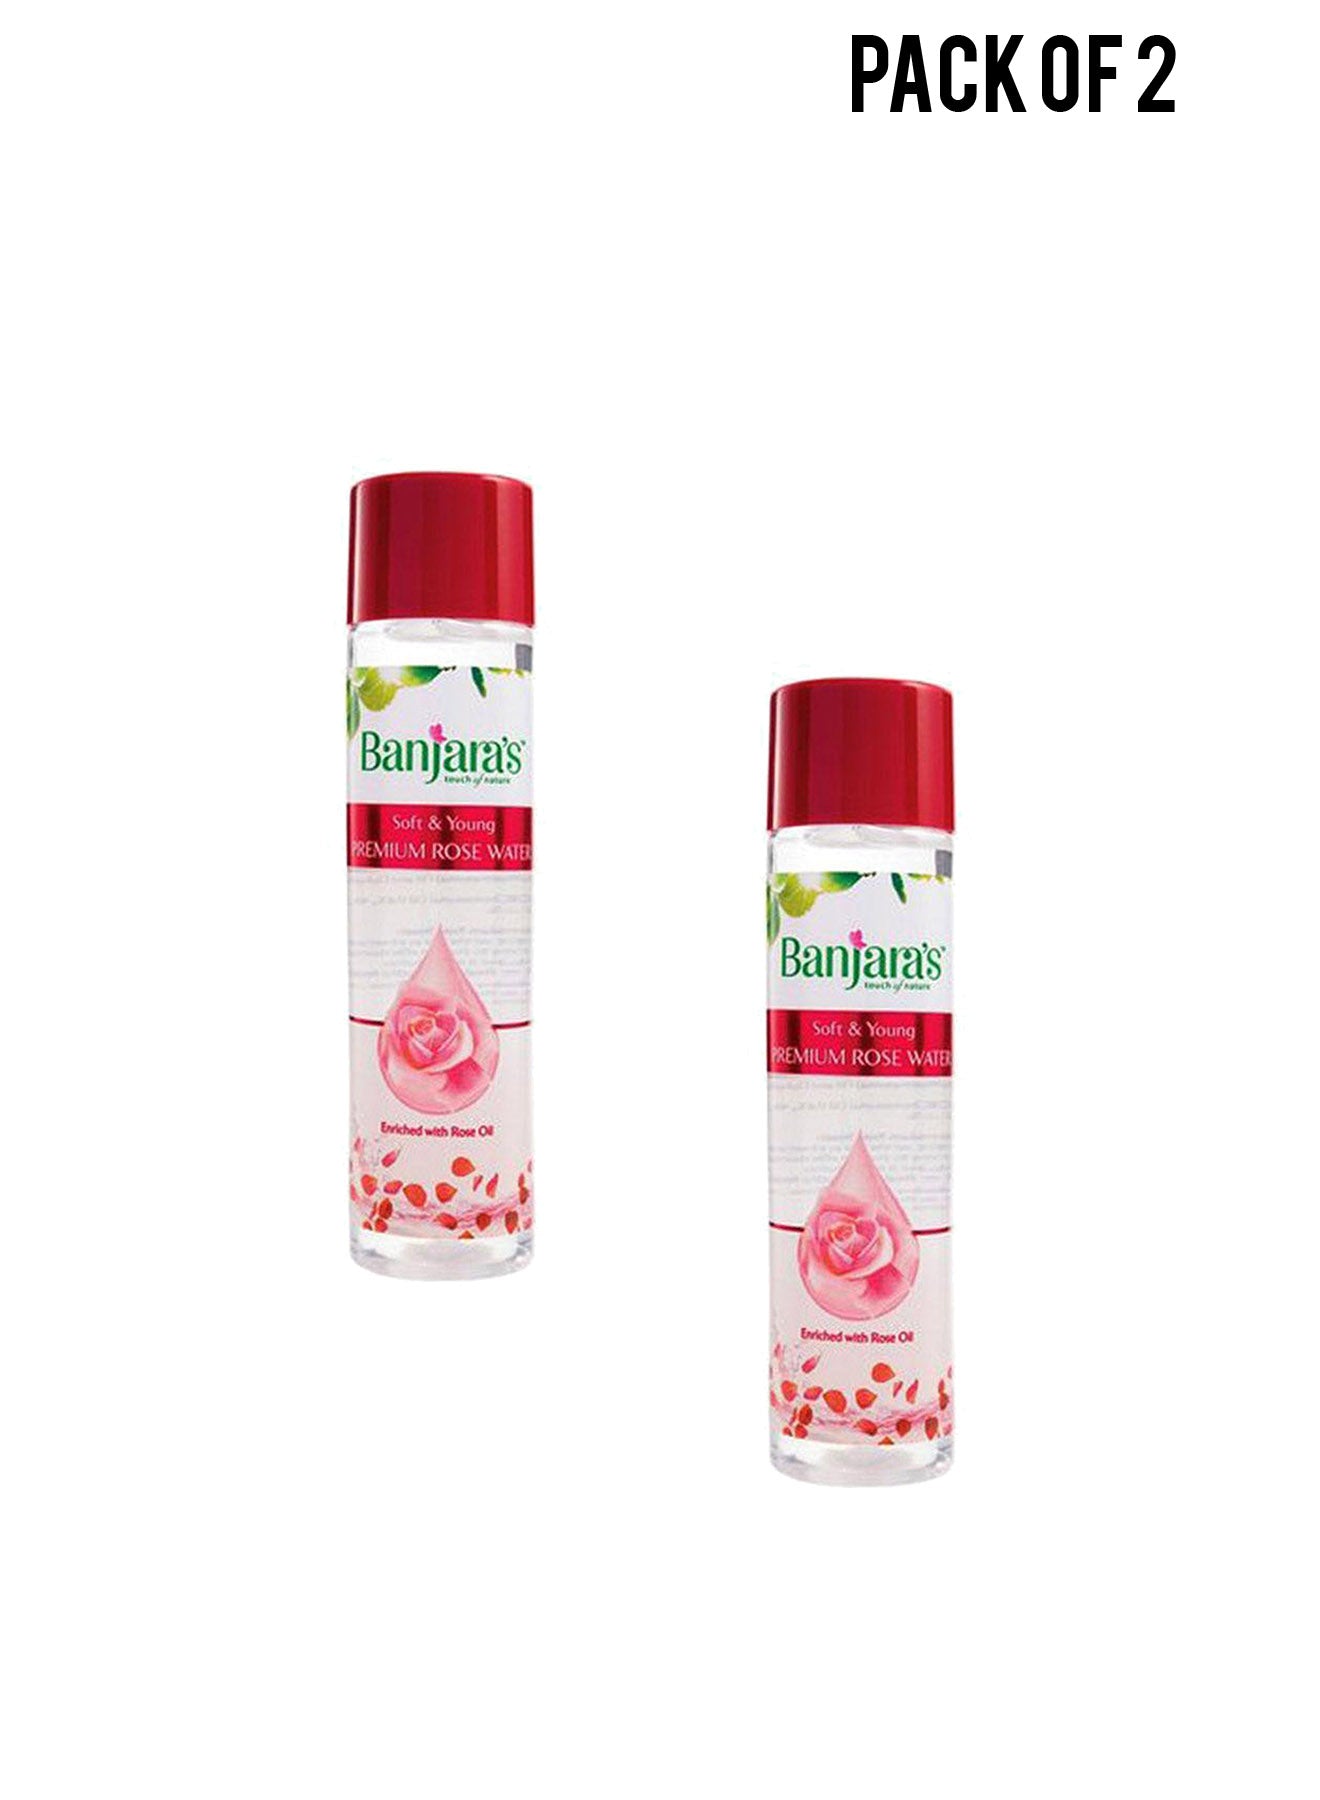 Banjaras Premium Soft and Young Rose Water 120ml Value Pack of 2 